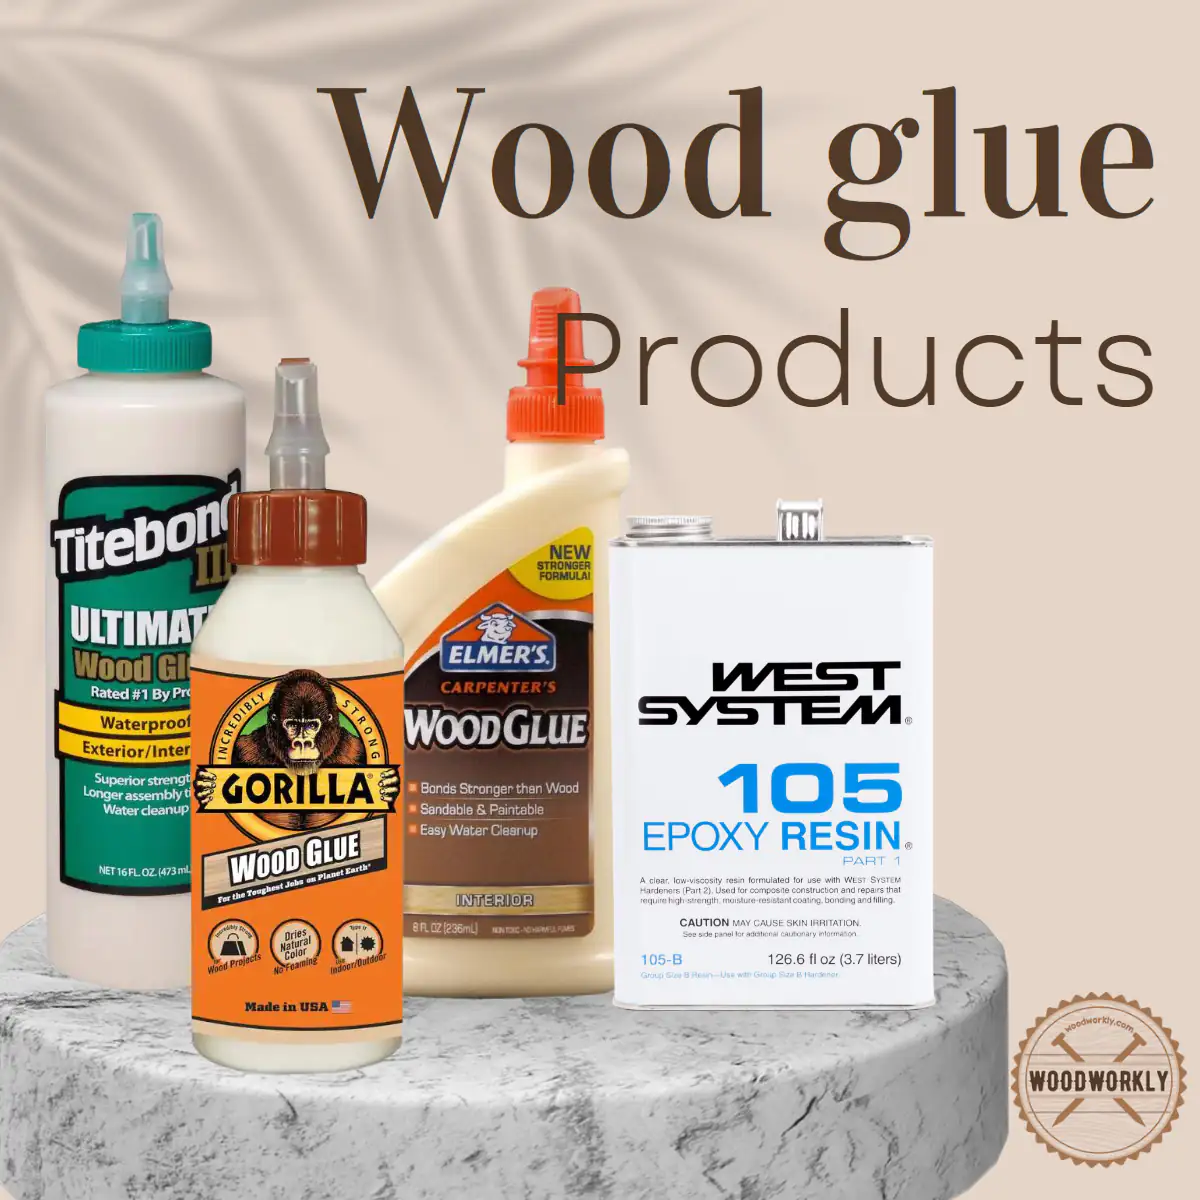 Wood glue products for painted wood